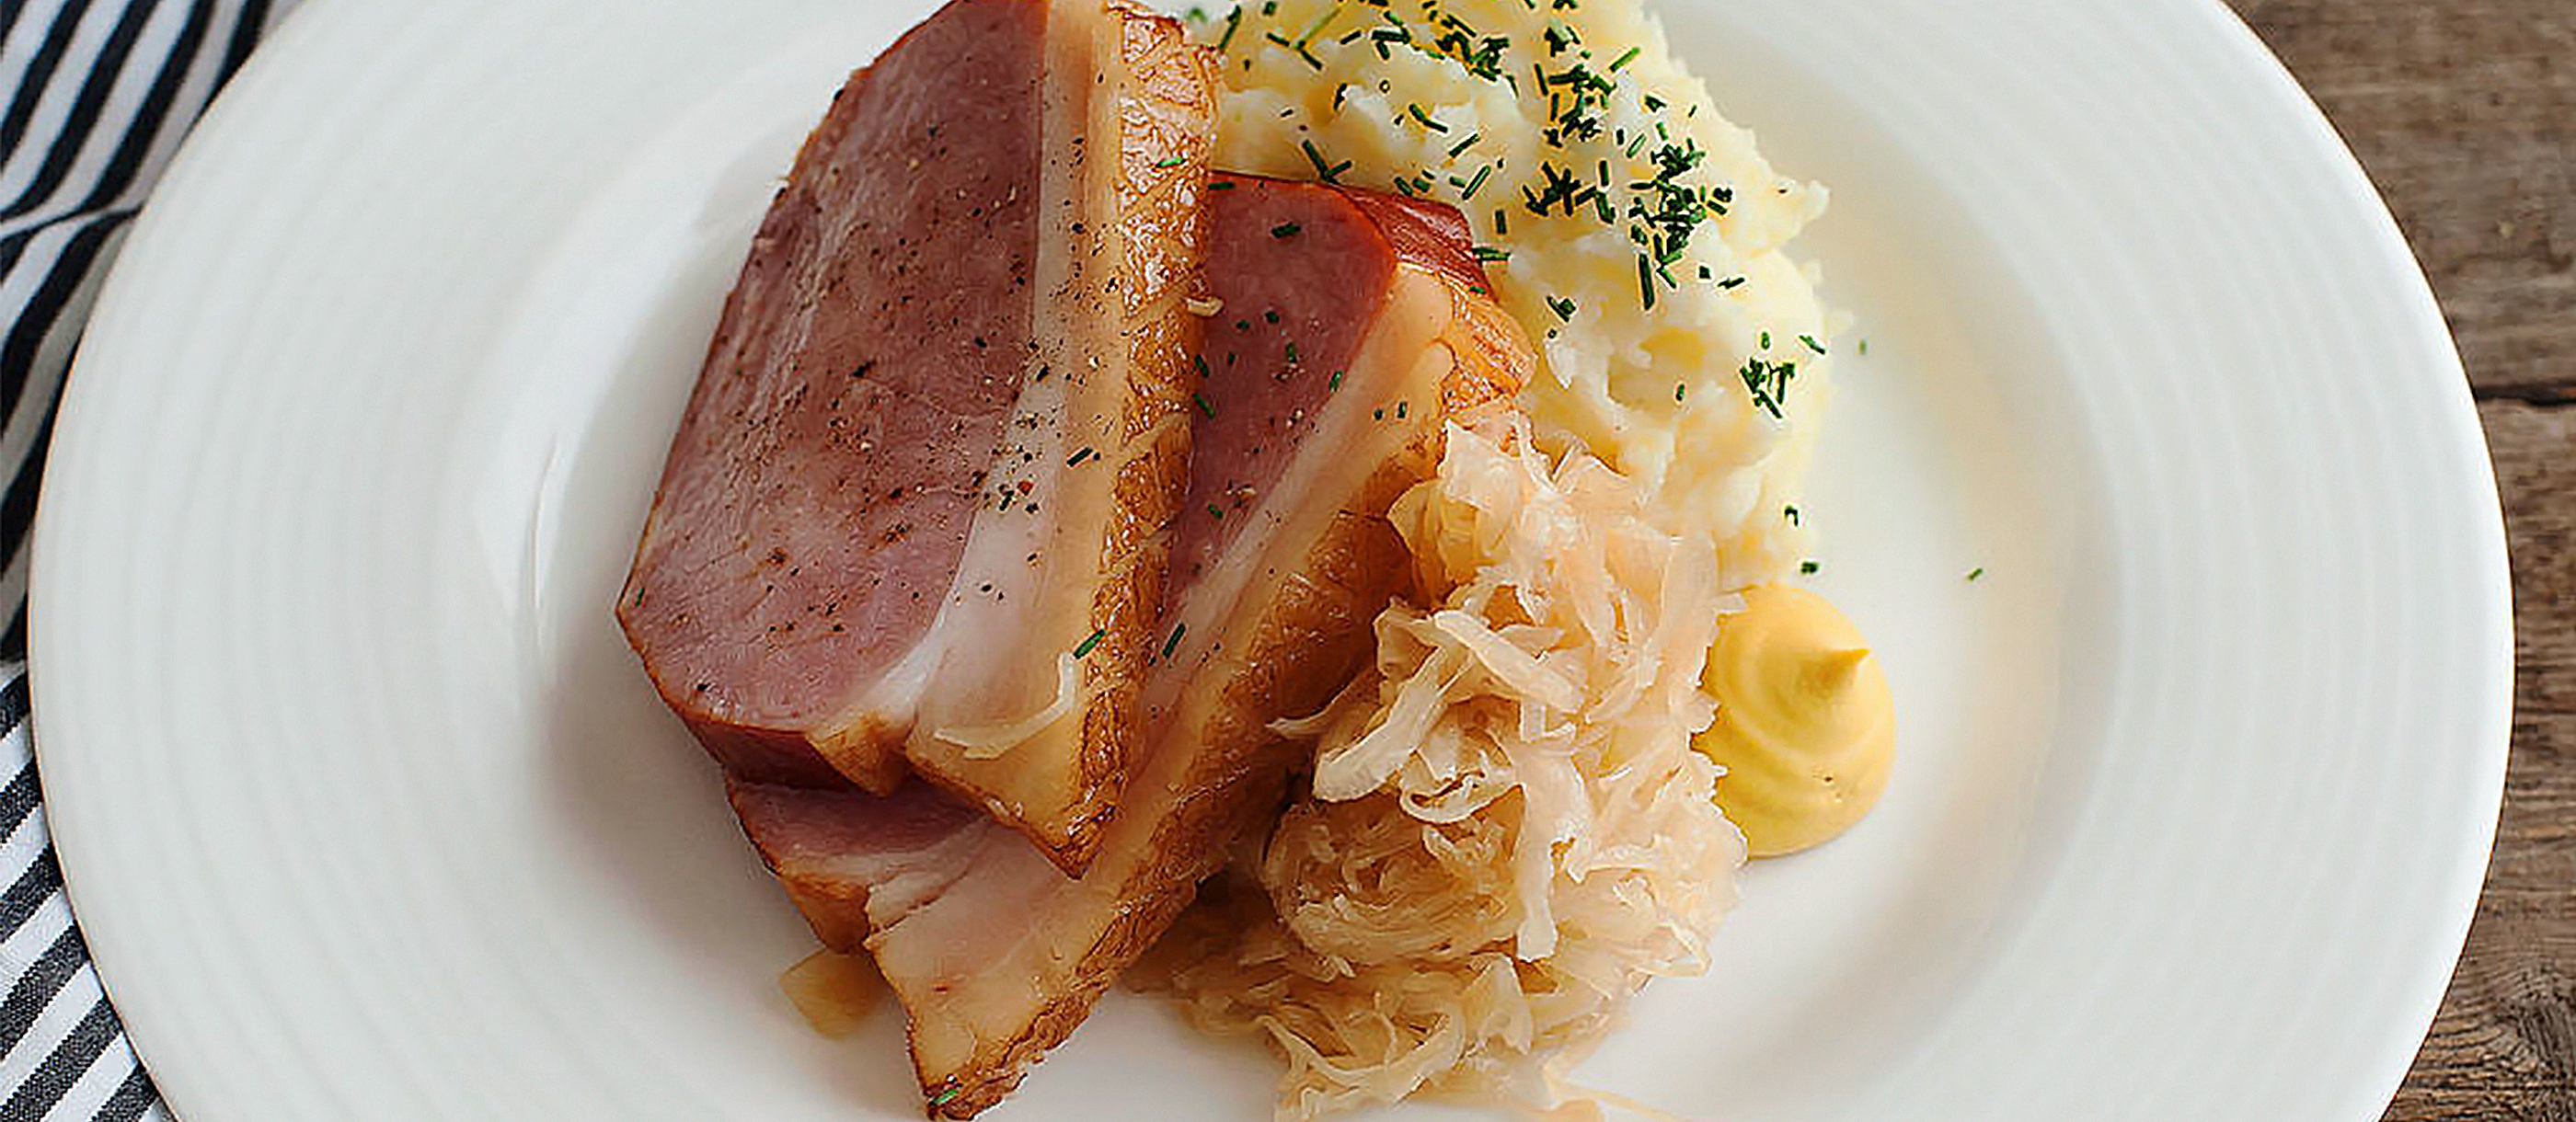 Kassler | Traditional Pork Dish From Germany